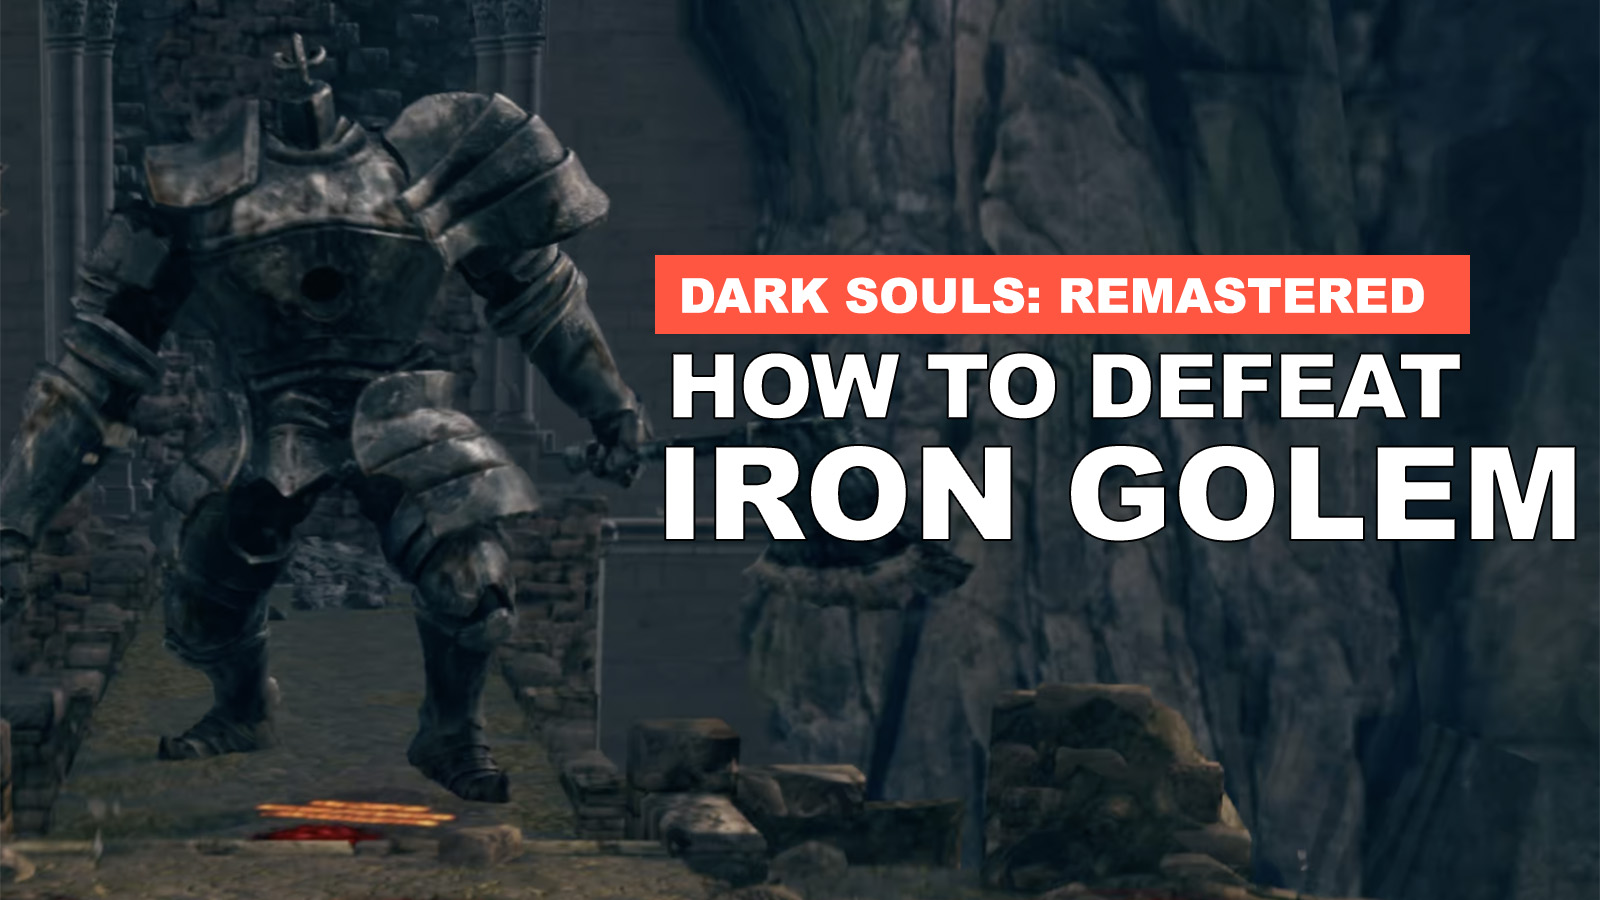 How To Defeat Iron Golem In Dark Souls: Remastered